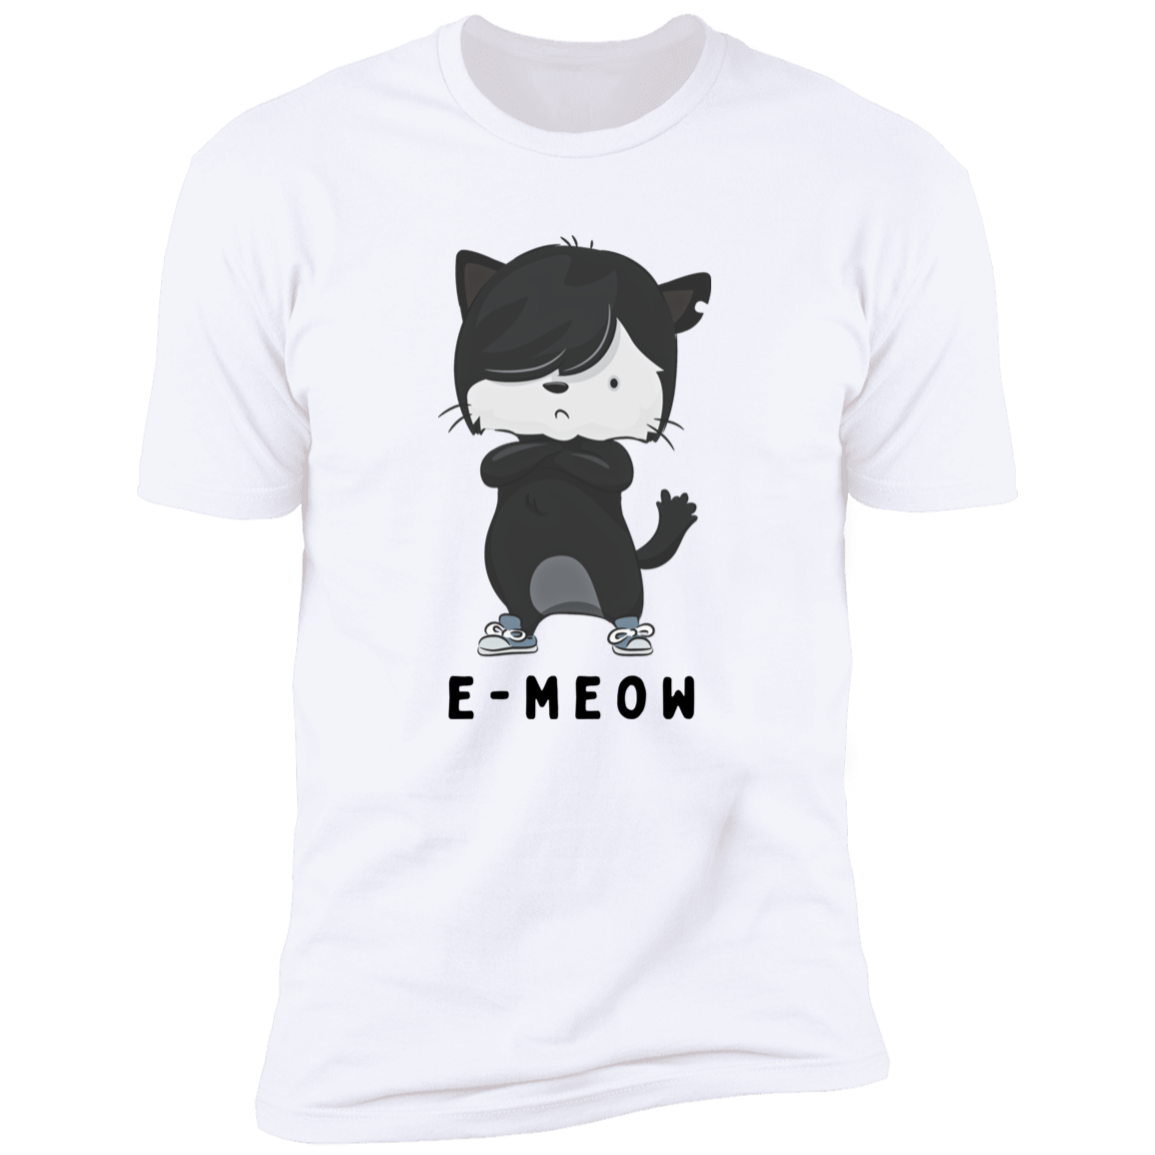 E-meow cat shirt, funny cat shirt for humans, cat mom and cat dad shirt, in white